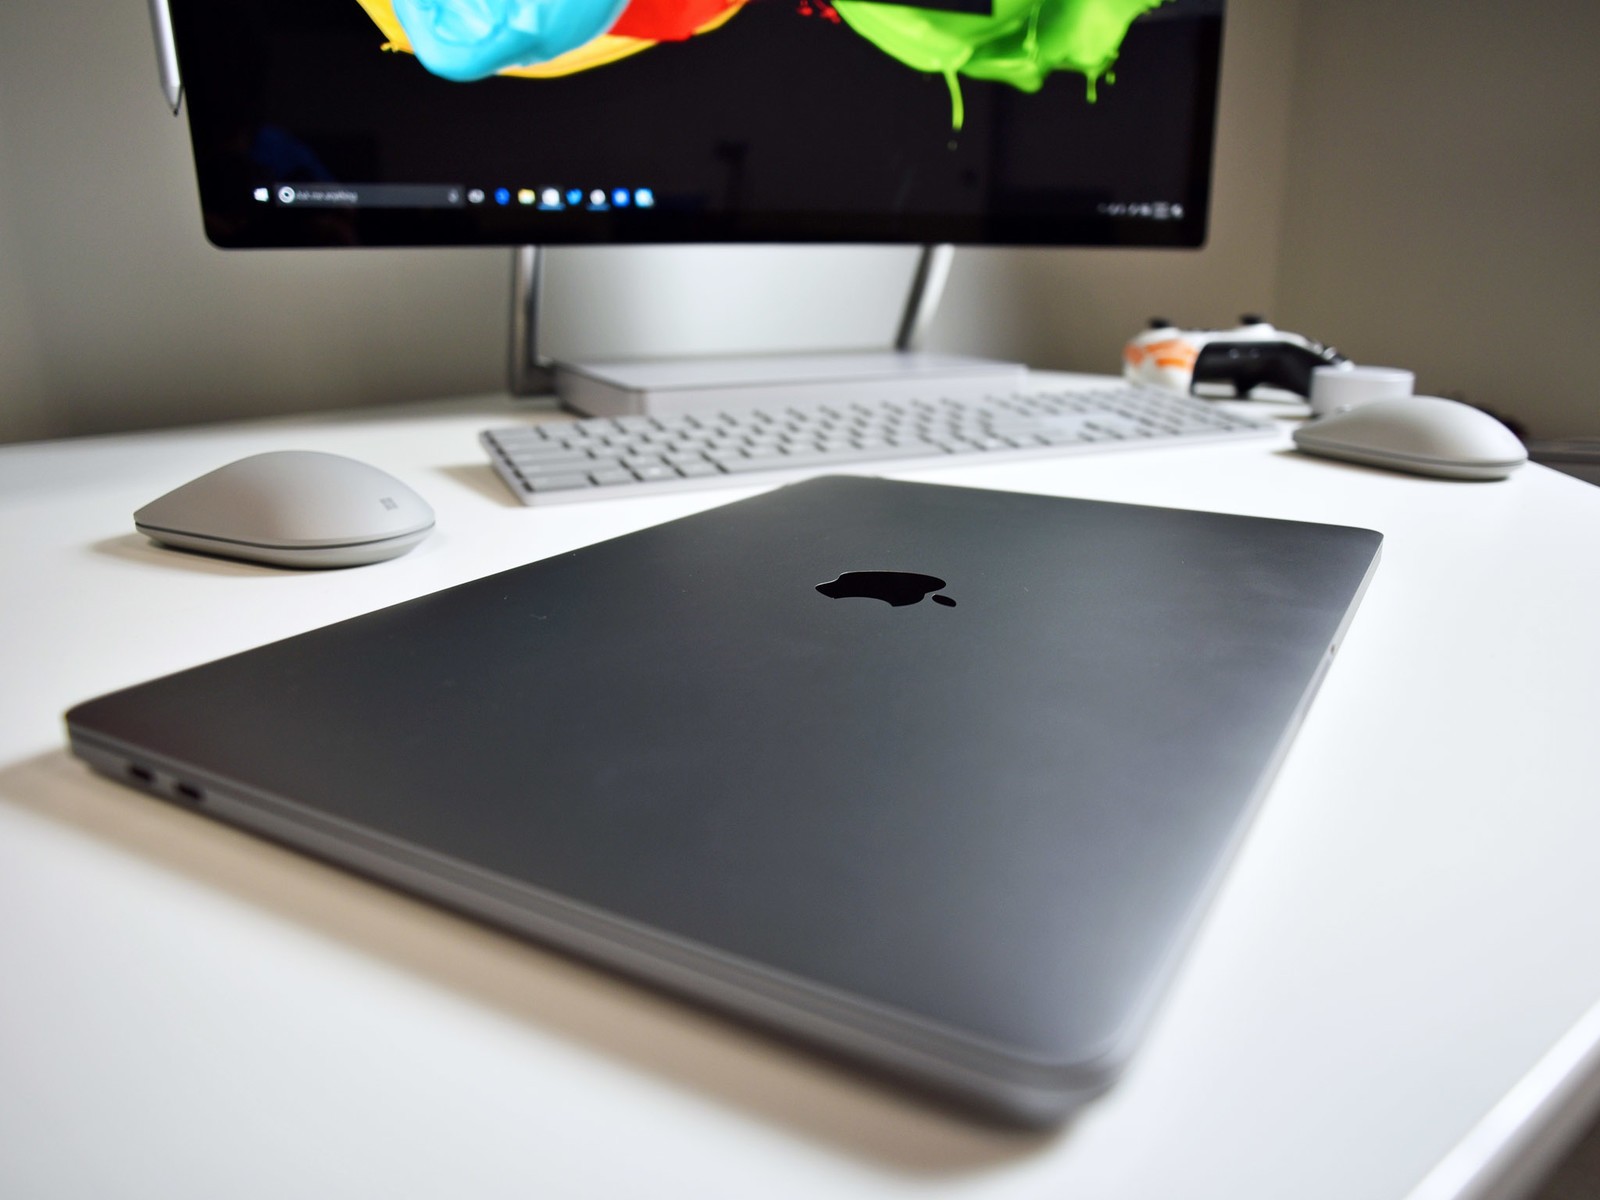 How to run mac os on pc laptop